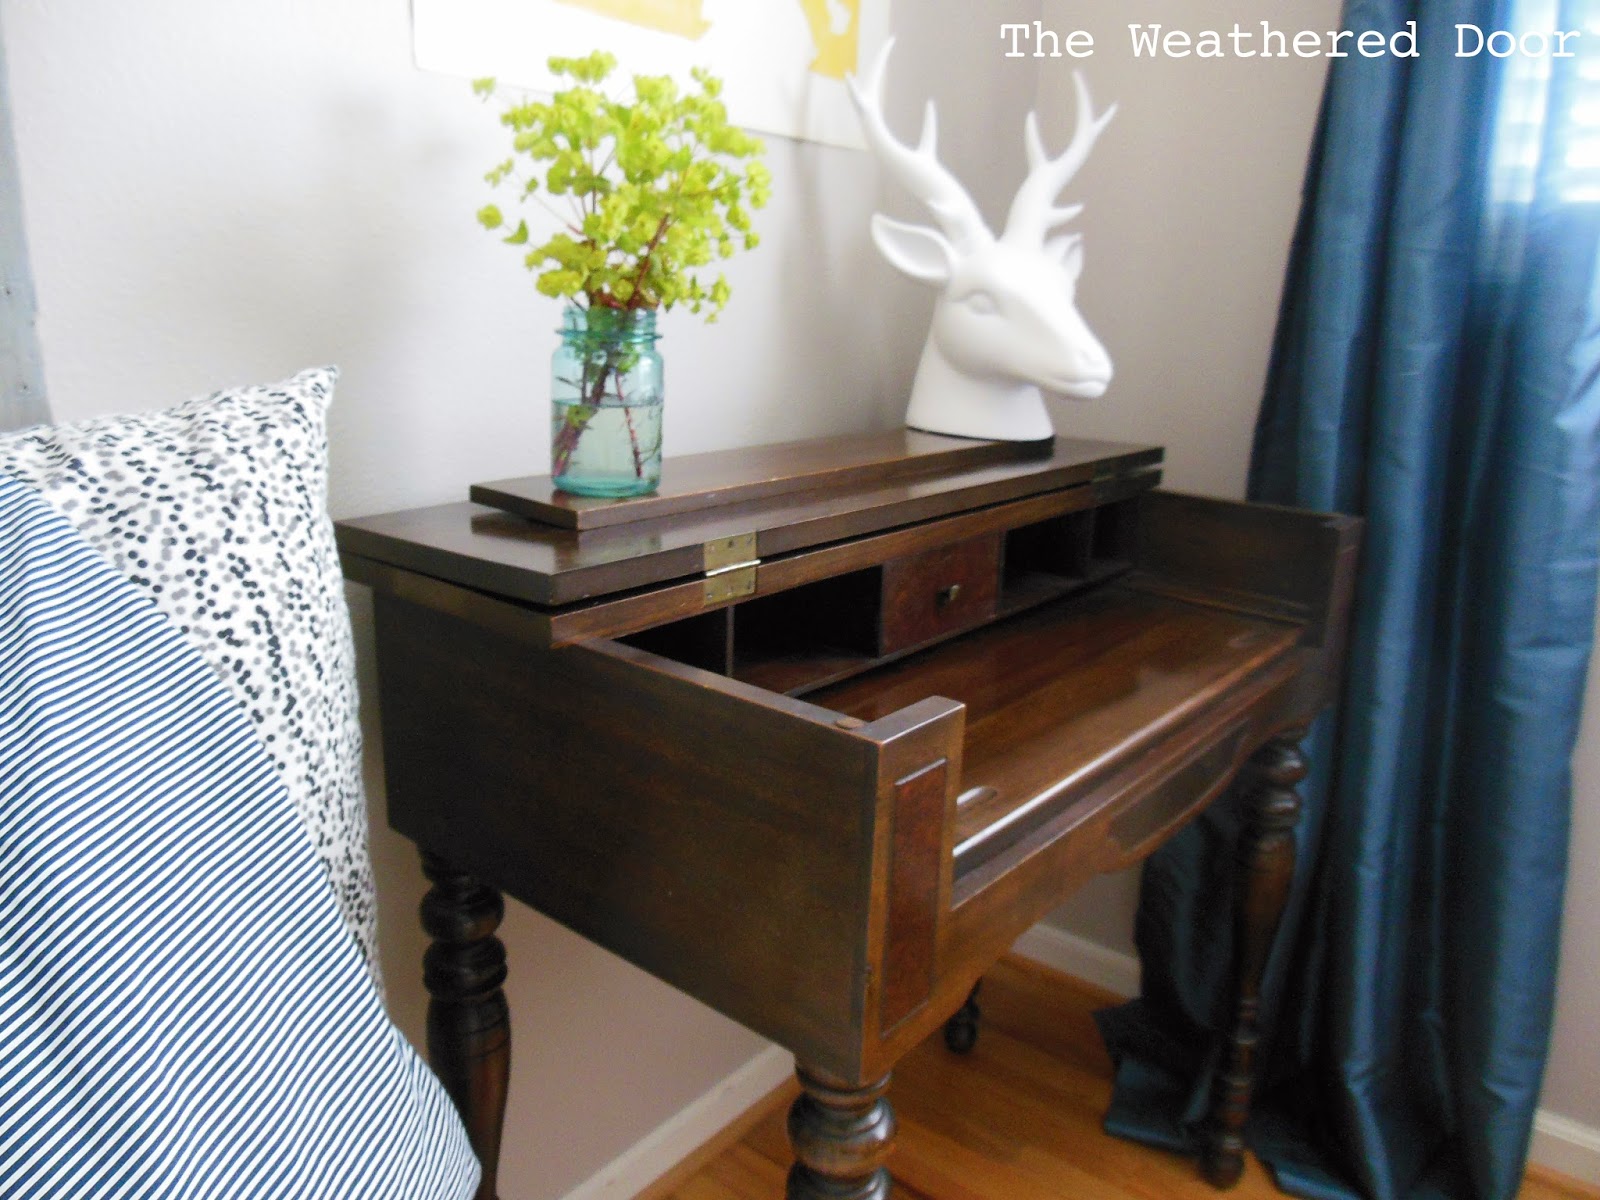 A Dark Wood Spinet Desk And Stepping Away From The Paint Brush